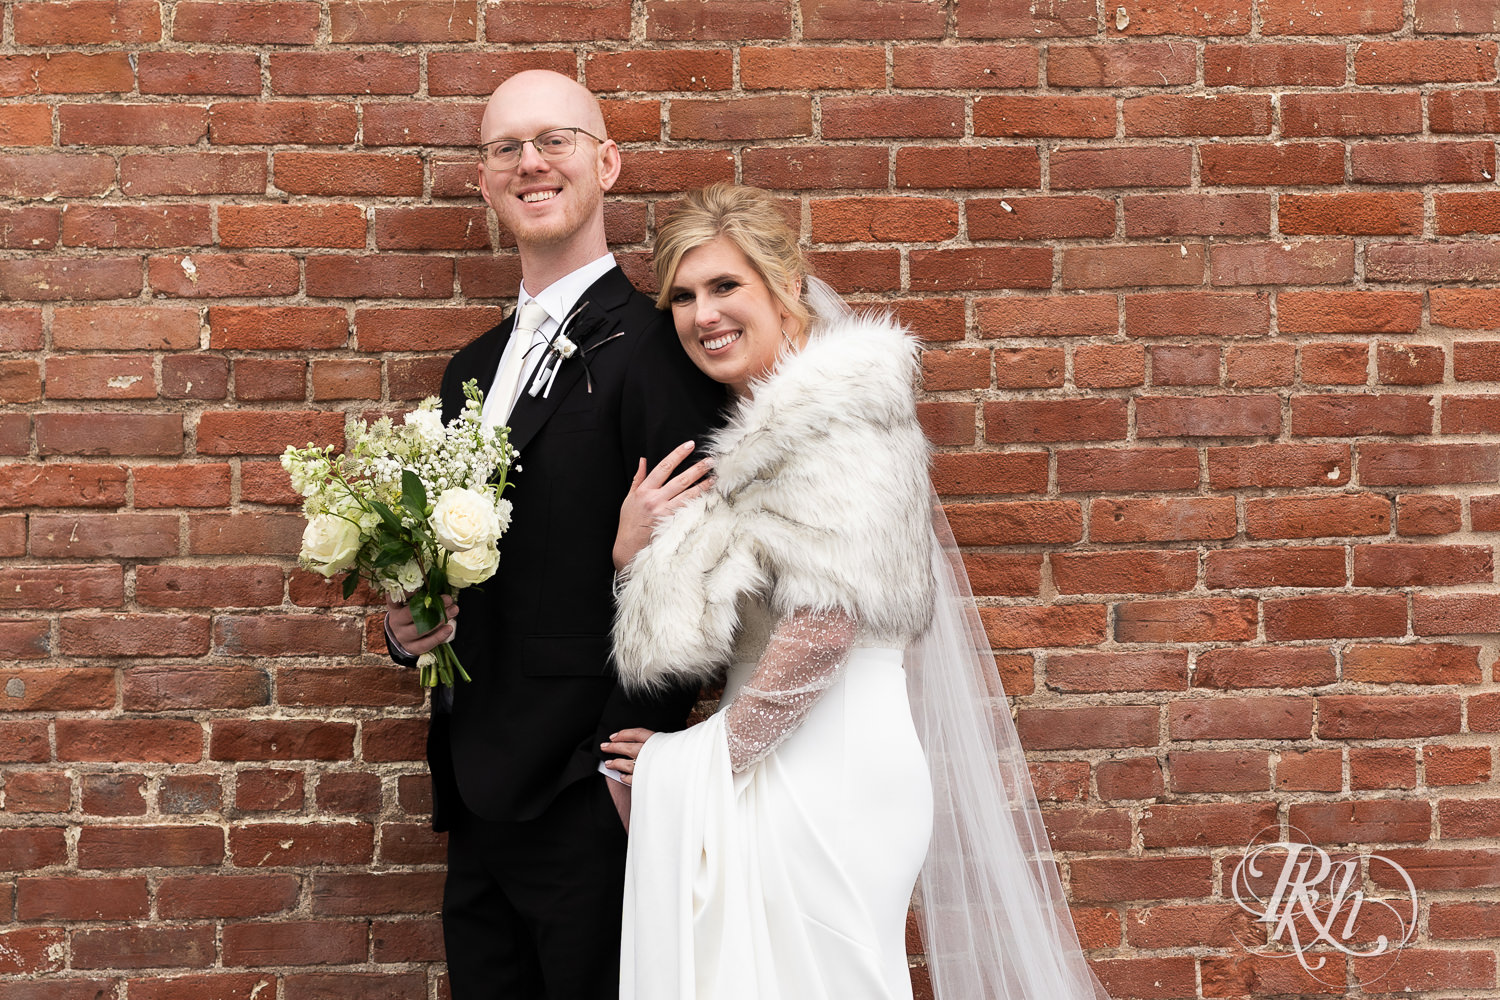 Bride and groom smile outside Gatherings at Station 10 in Saint Paul, Minnesota on winter wedding day.